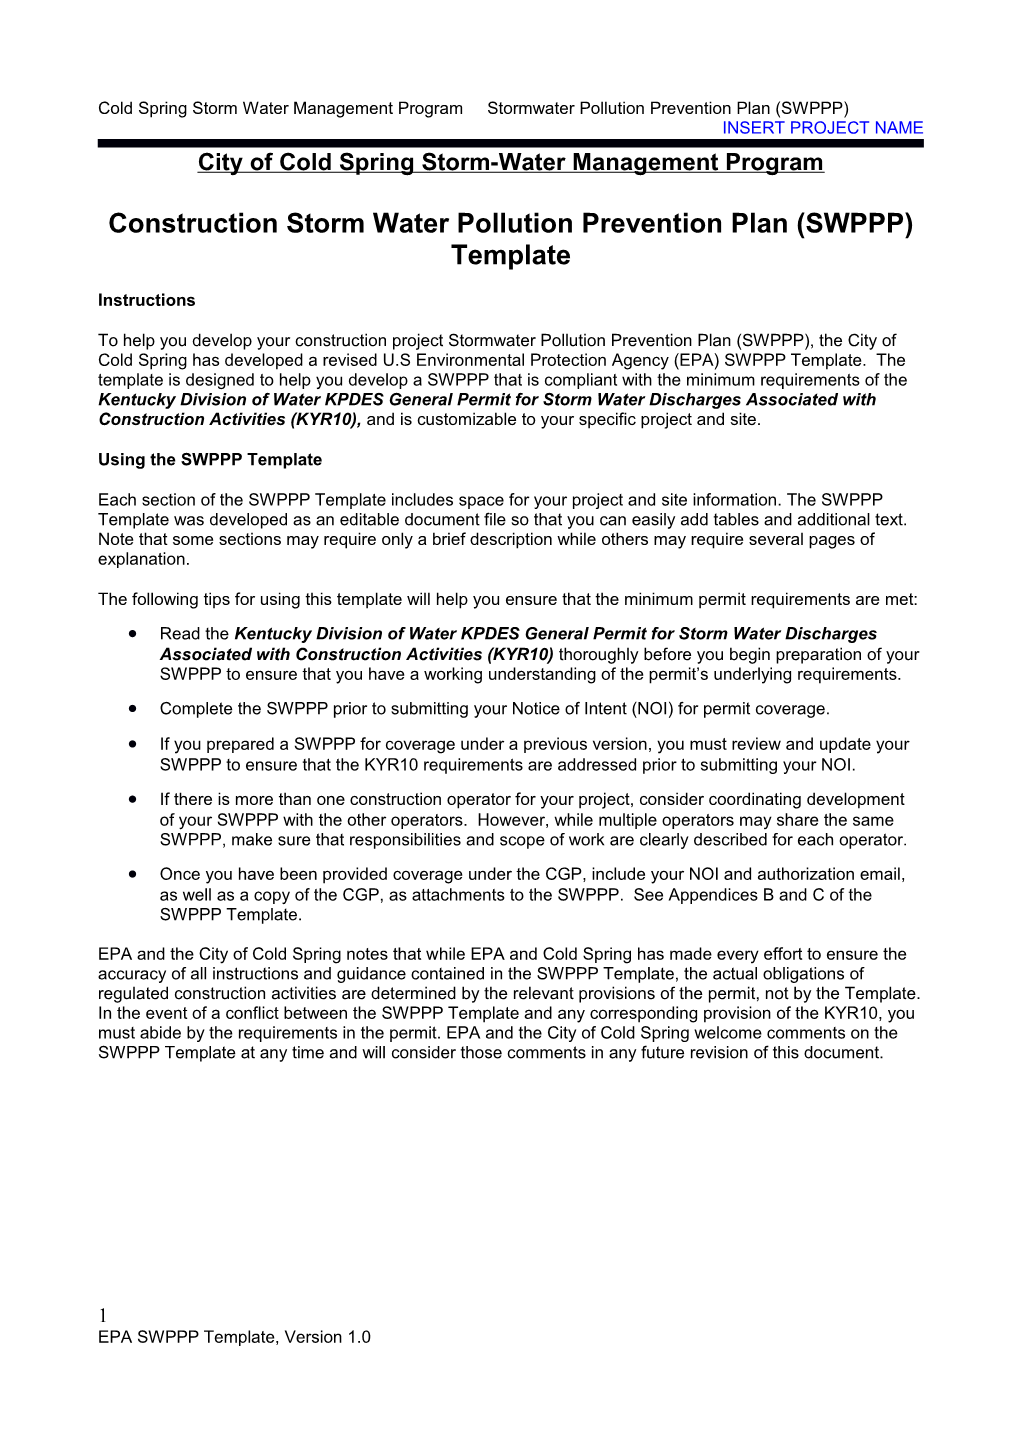 Stormwater Pollution Prevention Plan Template s2